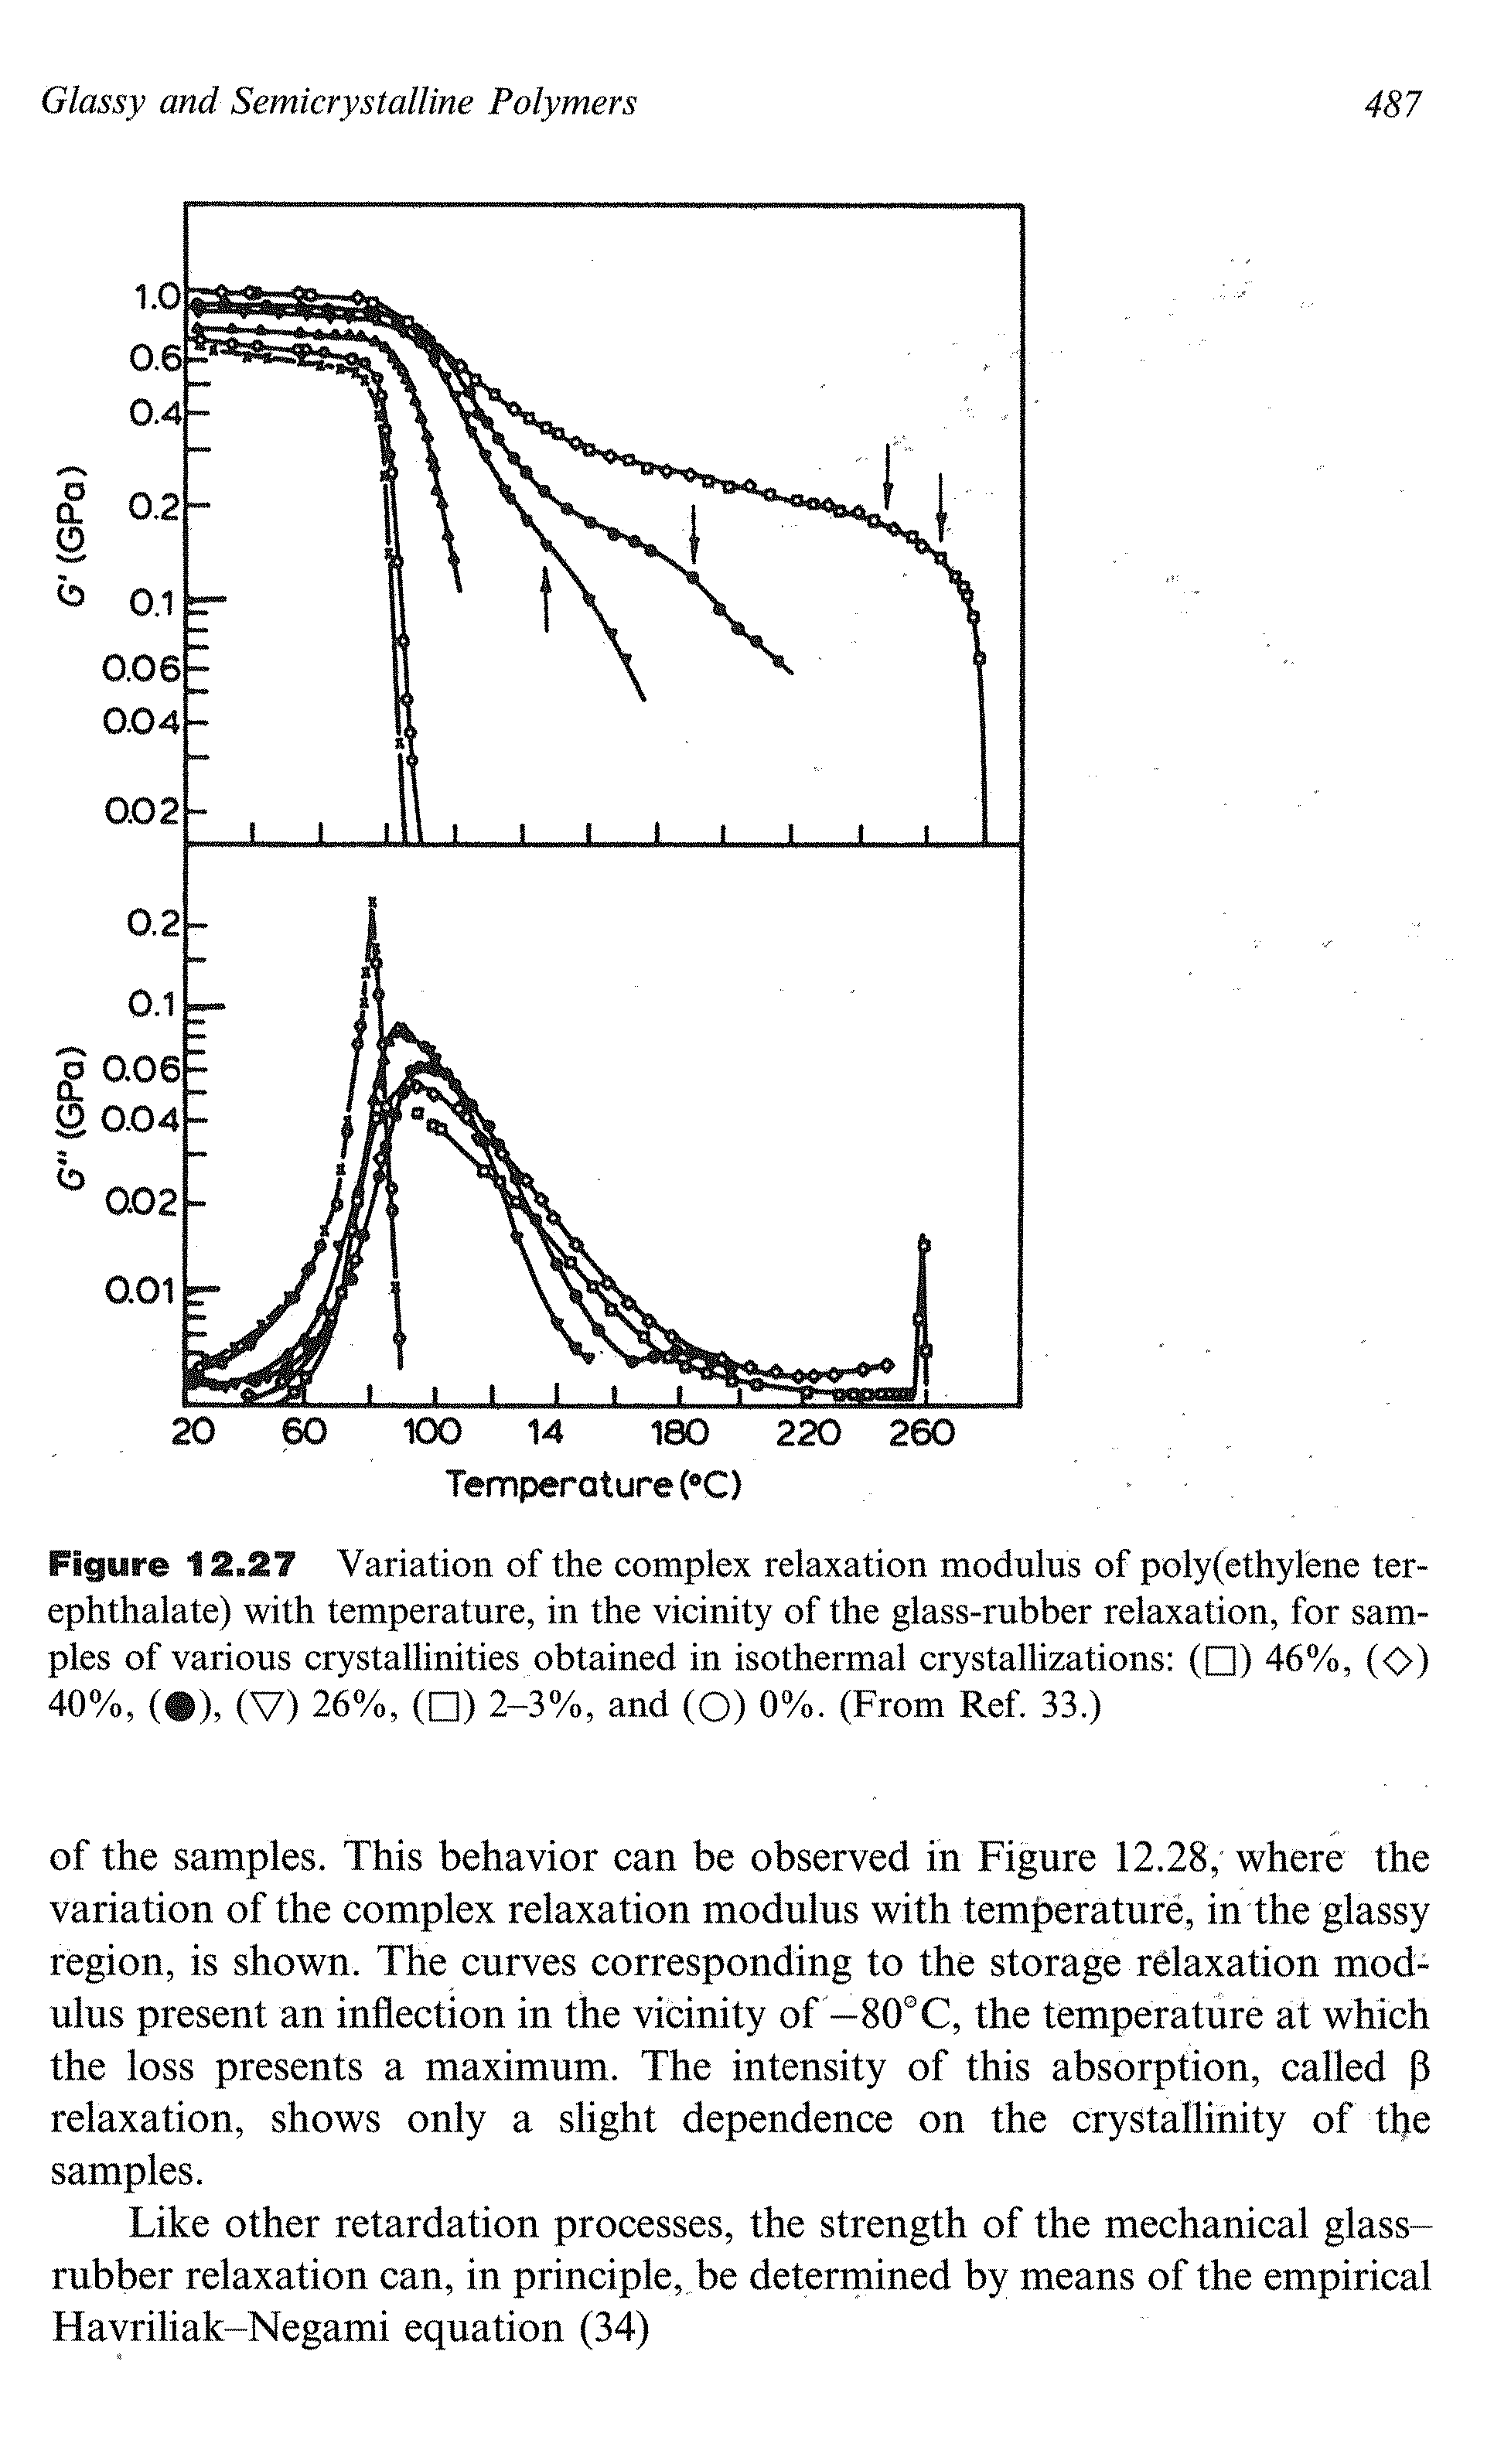 Figure 12,27 Variation of the complex relaxation modulus of poly(ethylene ter-ephthalate) with temperature, in the vicinity of the glass-rubber relaxation, for samples of various crystallinities obtained in isothermal crystallizations ( ) 46%, (<>) 40%, ( ), (V) 26%, ( ) 2-3%, and (O) 0%. (From Ref. 33.)...